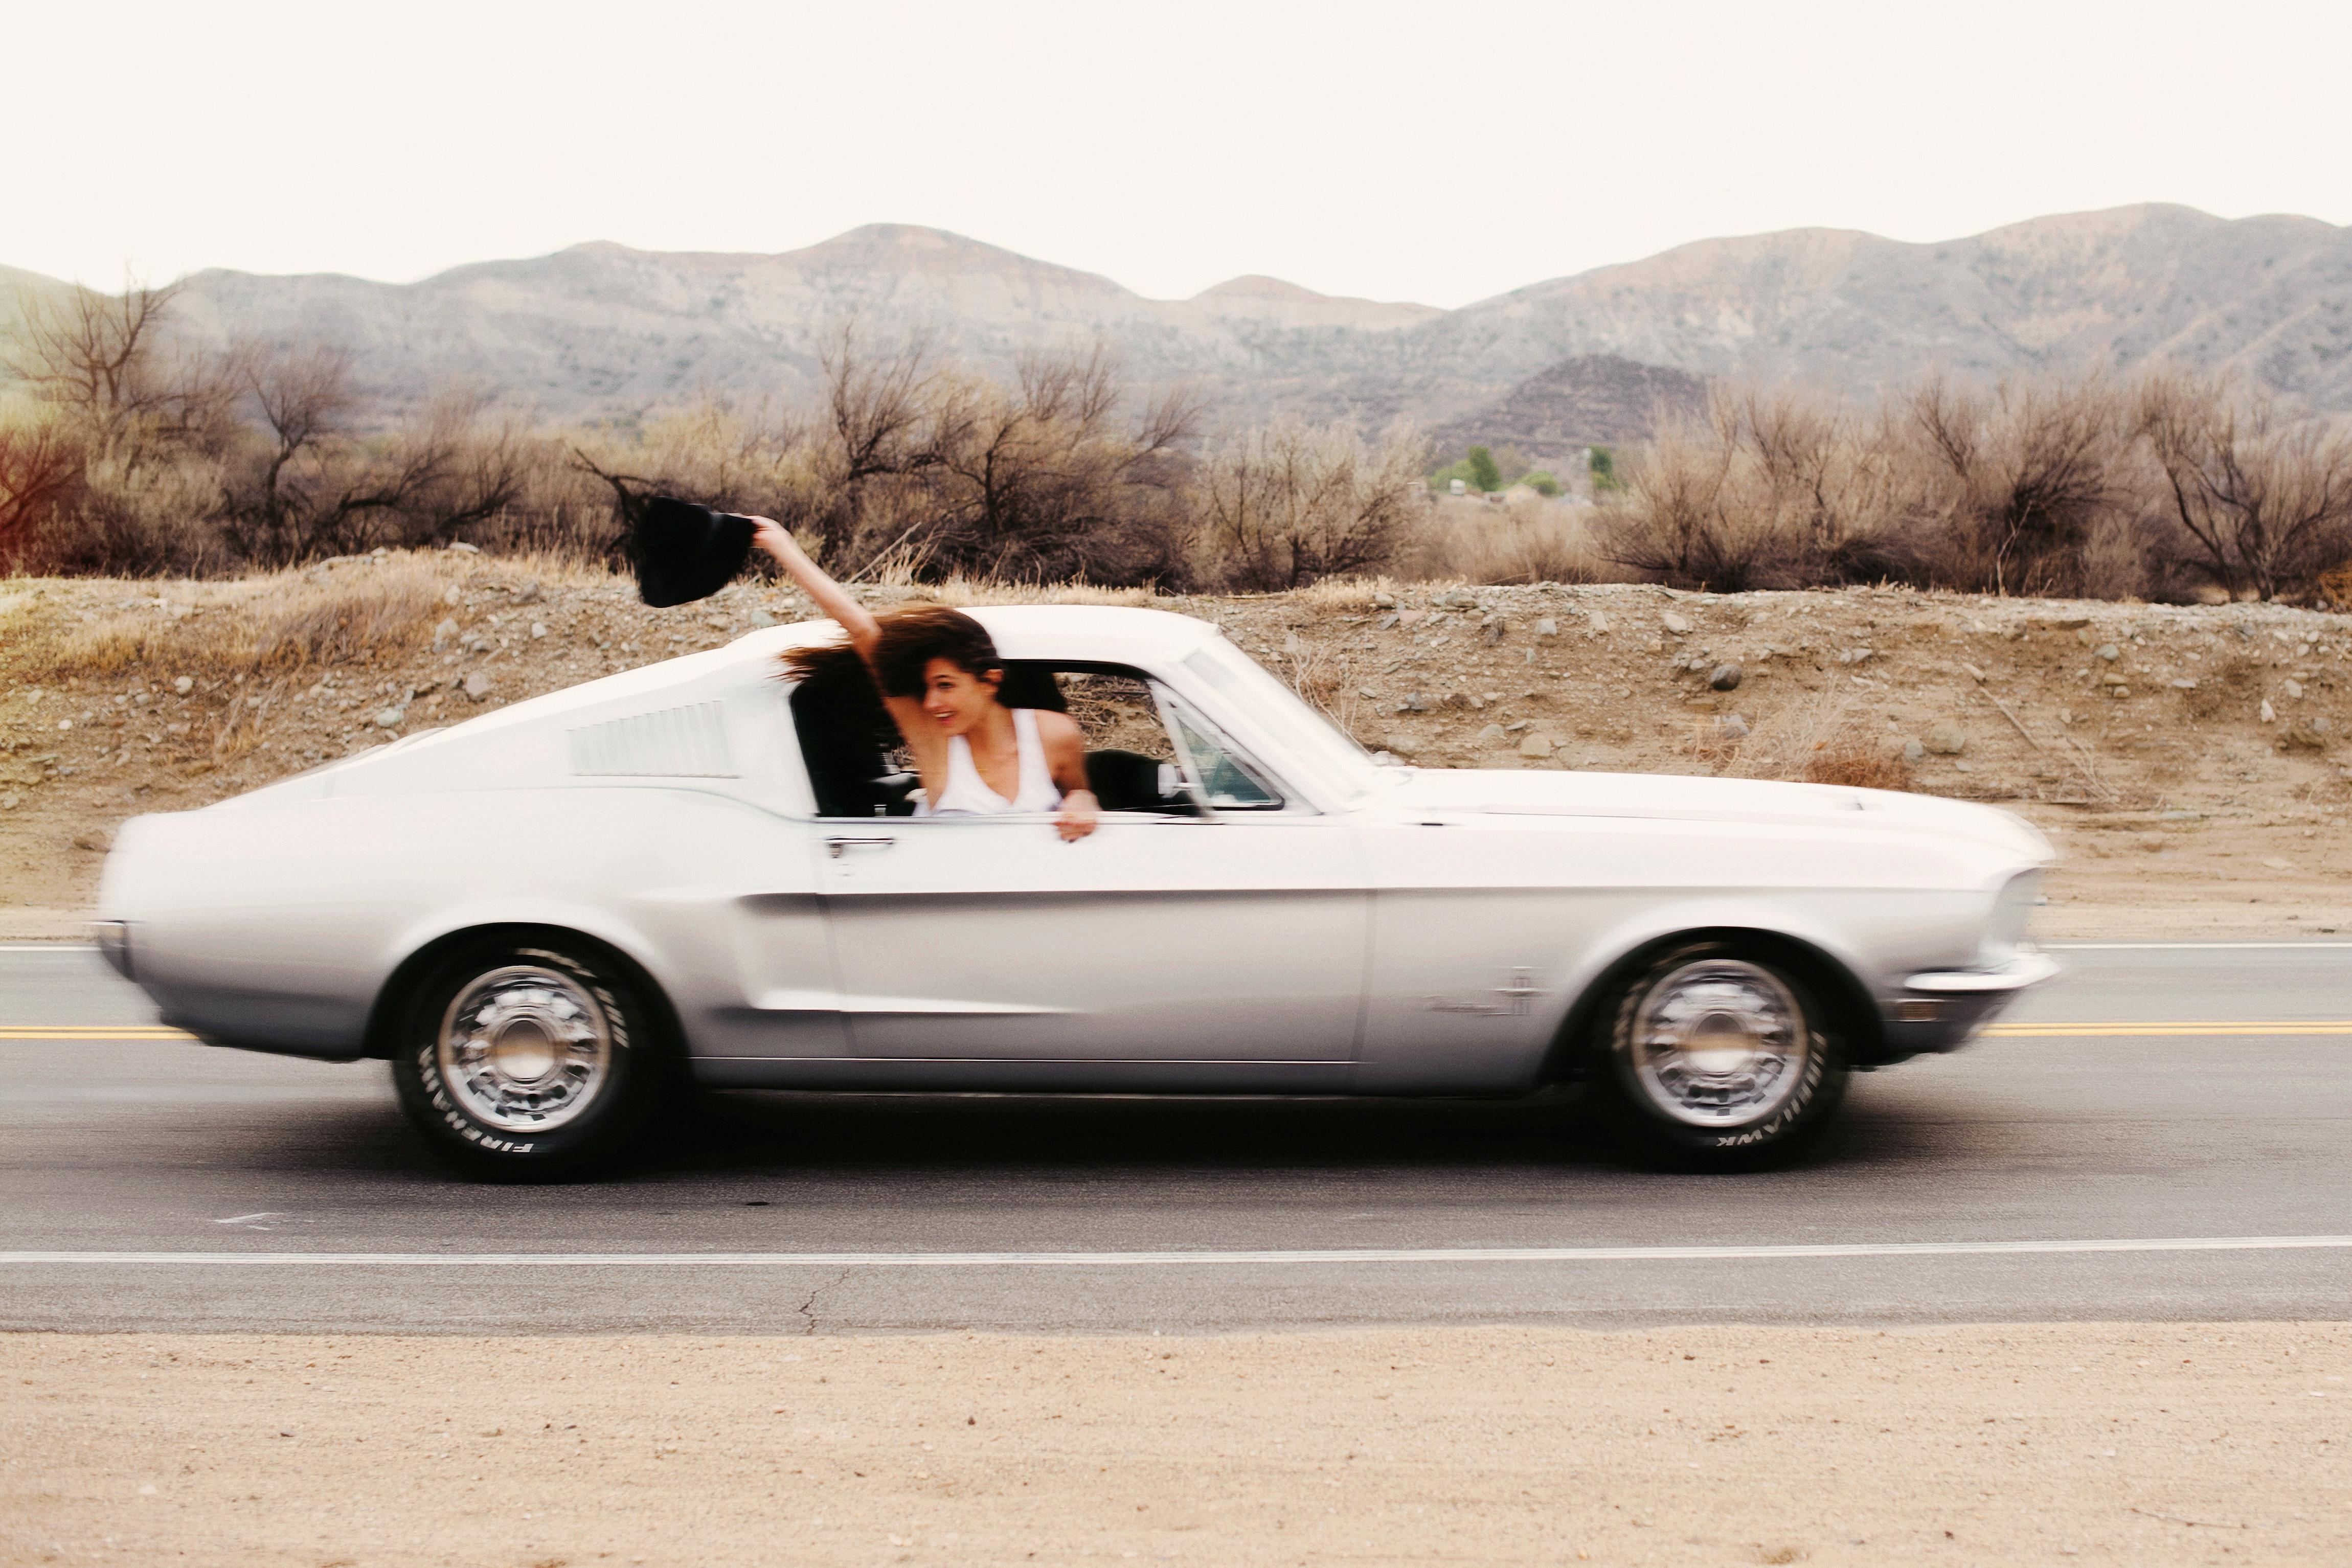 "Untitled 1" (Mustang) Original photography Edition 2/7 by Larsen Sotelo 

Untitled 1 
From the Mustang series
Giclee (Archival Ink) print on 310G Platine Fibre Cotton Rag w/satin finish 32” X 24” inch
Limited Edition of 7
2014
Signed and numbered